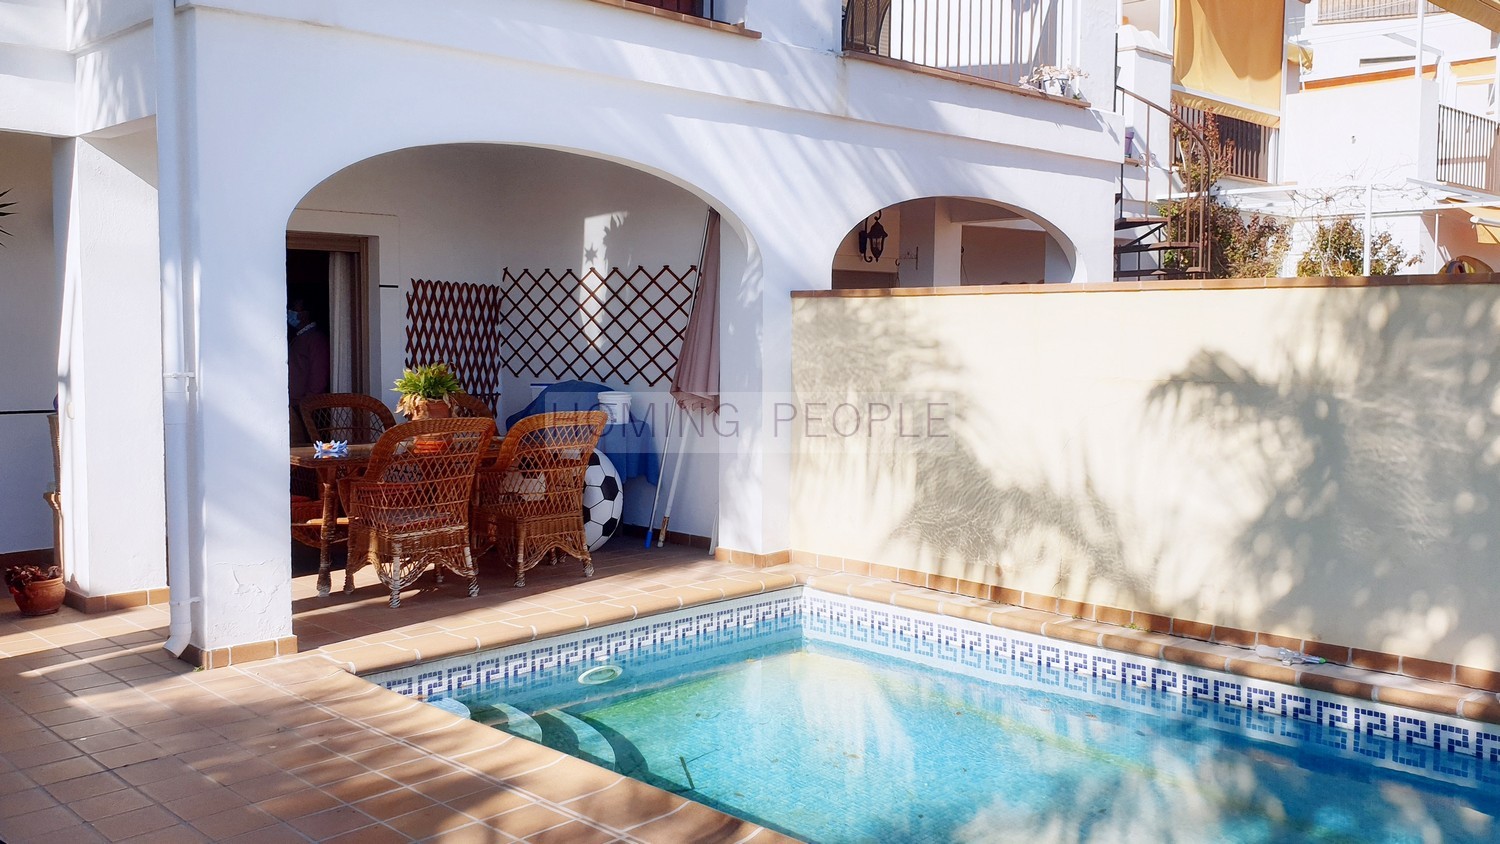 Quality terraced house with private pool and garage, in a residential area 5 minutes from the centre and the beach